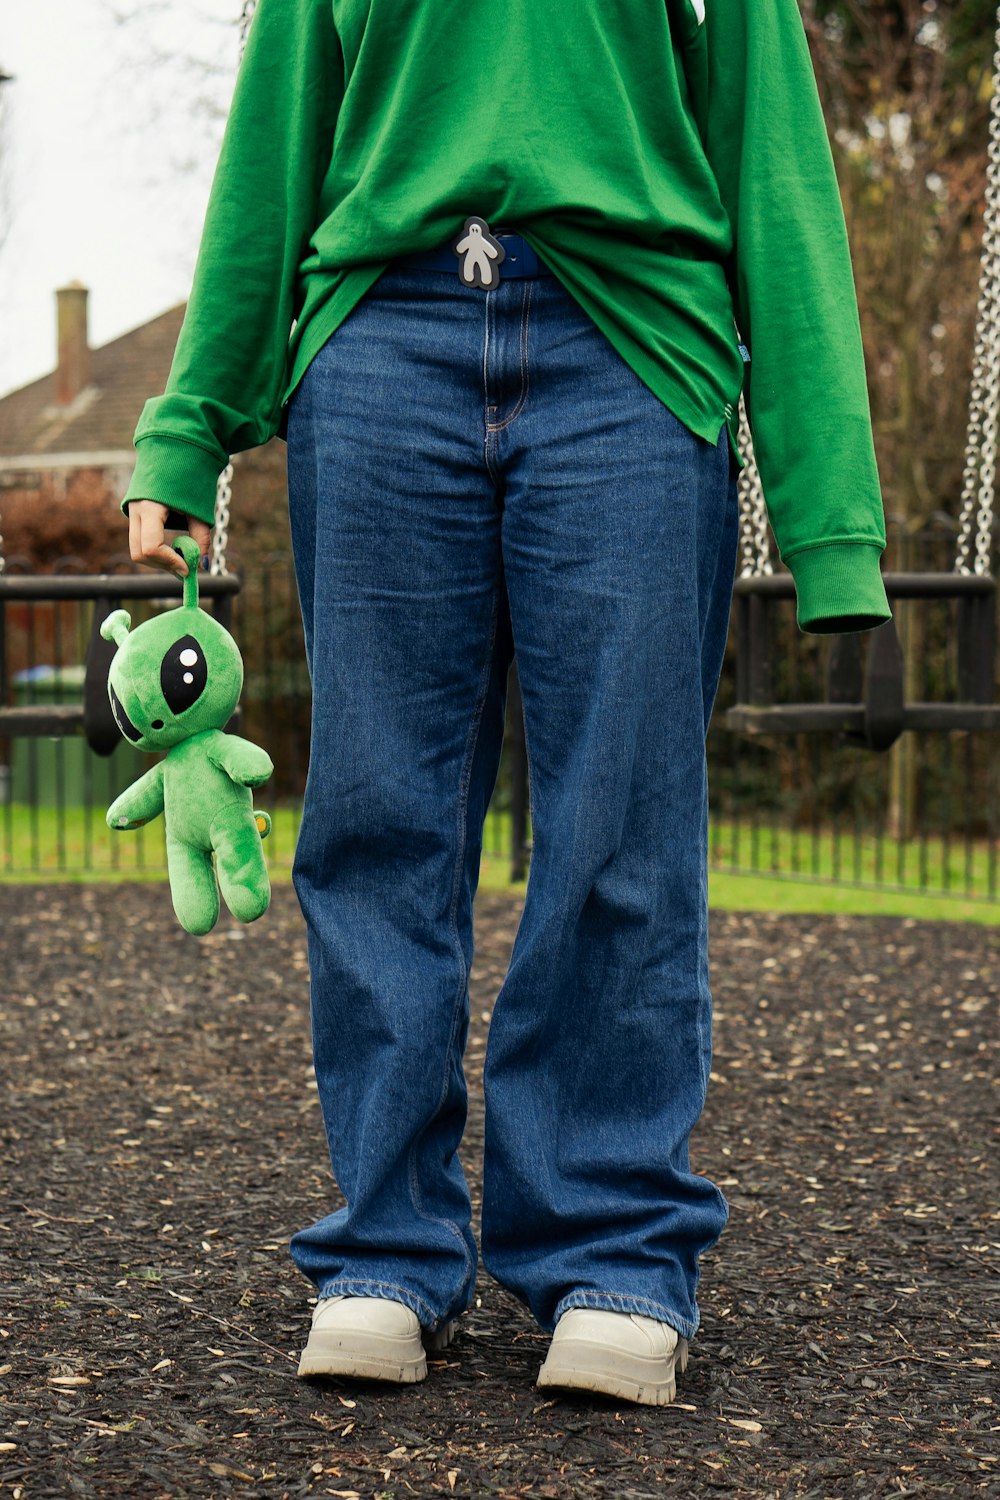 a person in a green shirt holding a green stuffed animal